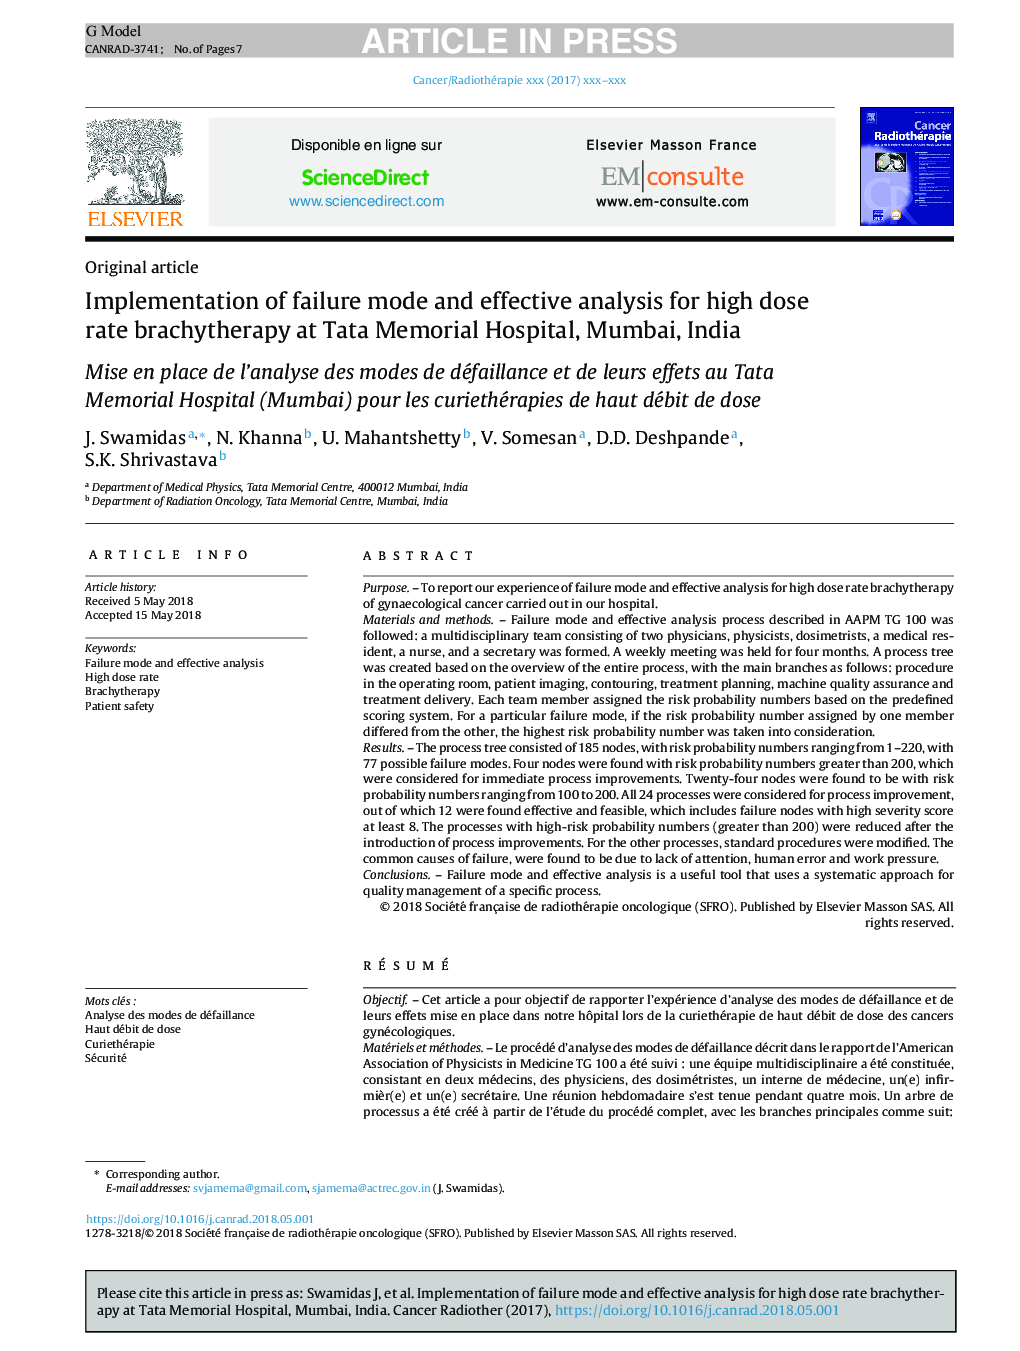 Implementation of failure mode and effective analysis for high dose rate brachytherapy at Tata Memorial Hospital, Mumbai, India